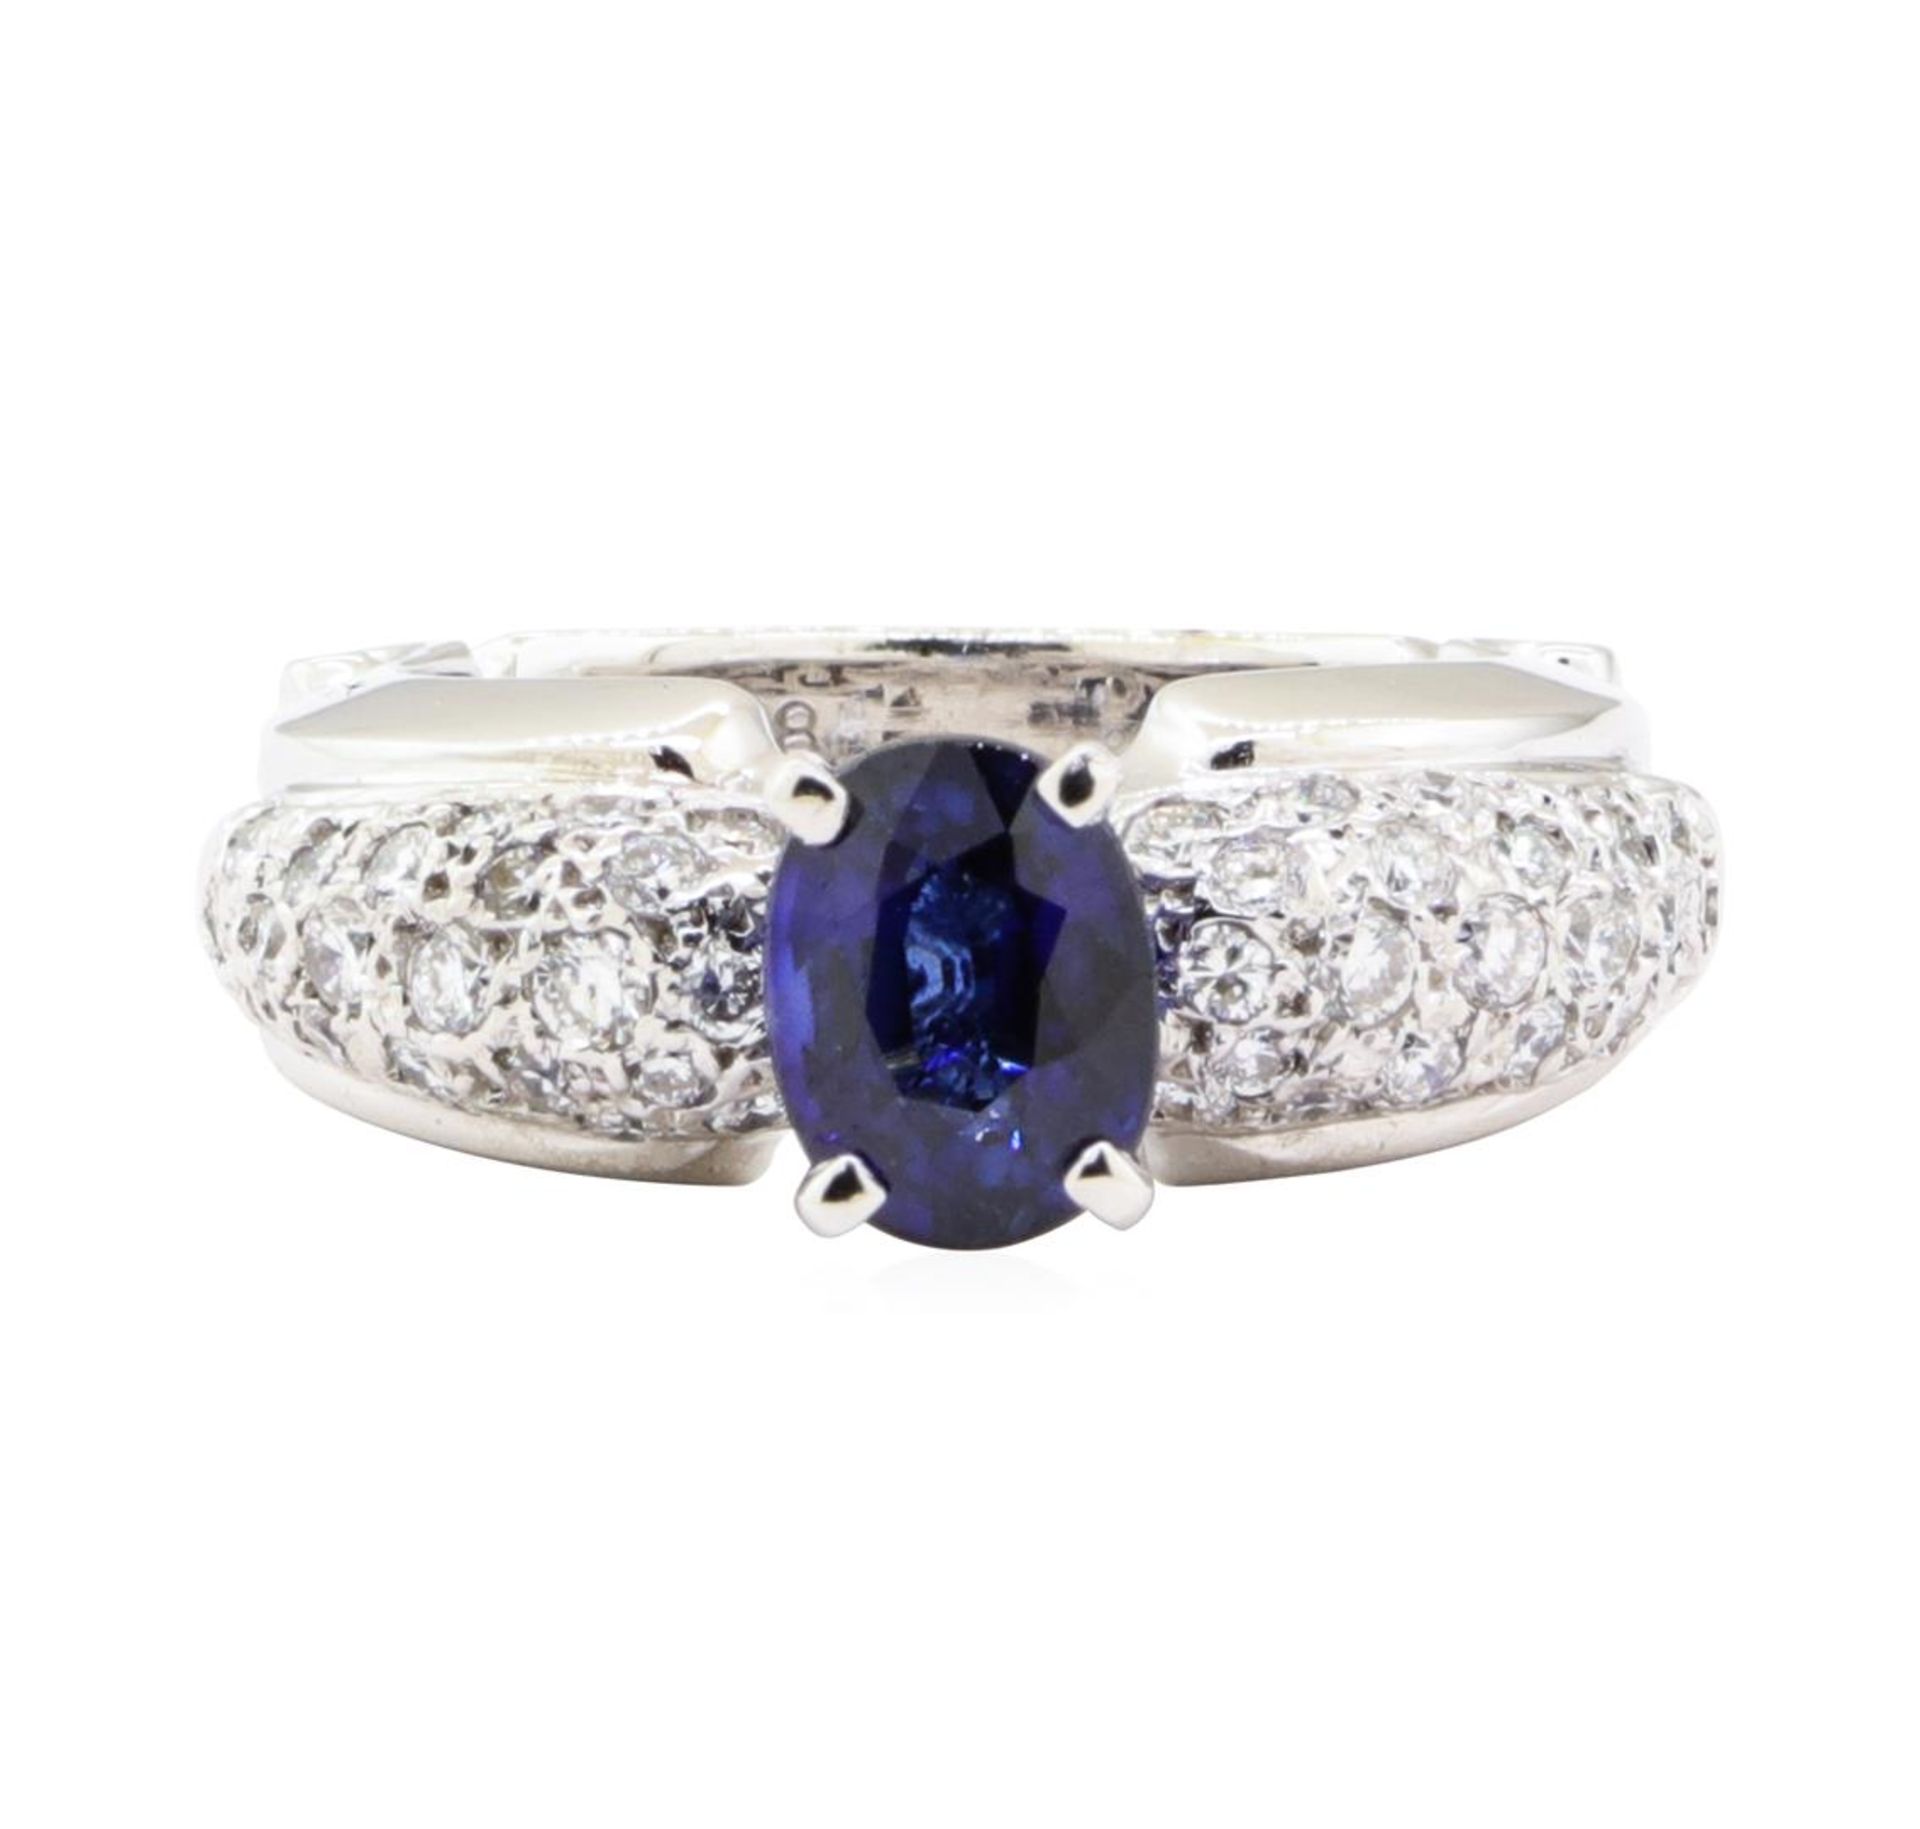 2.81 ctw Sapphire And Diamond Ring - 18KT White Gold - Image 2 of 5